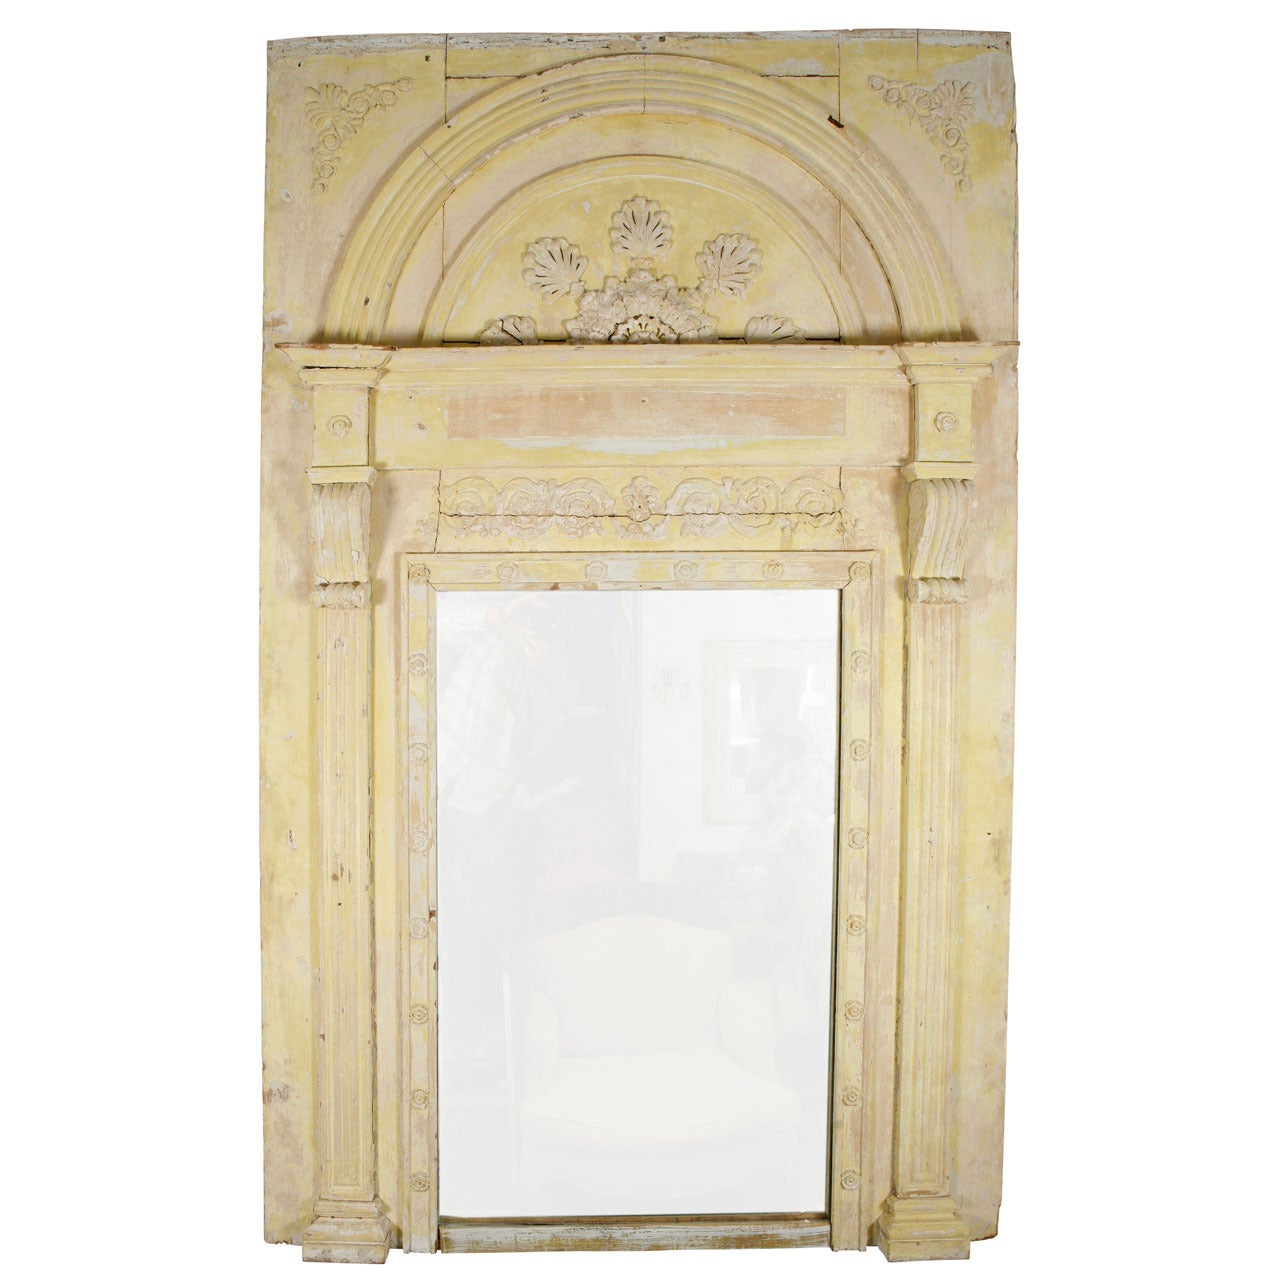 19th c. Yellow Painted Wood and Plaster Trumeau Mirror